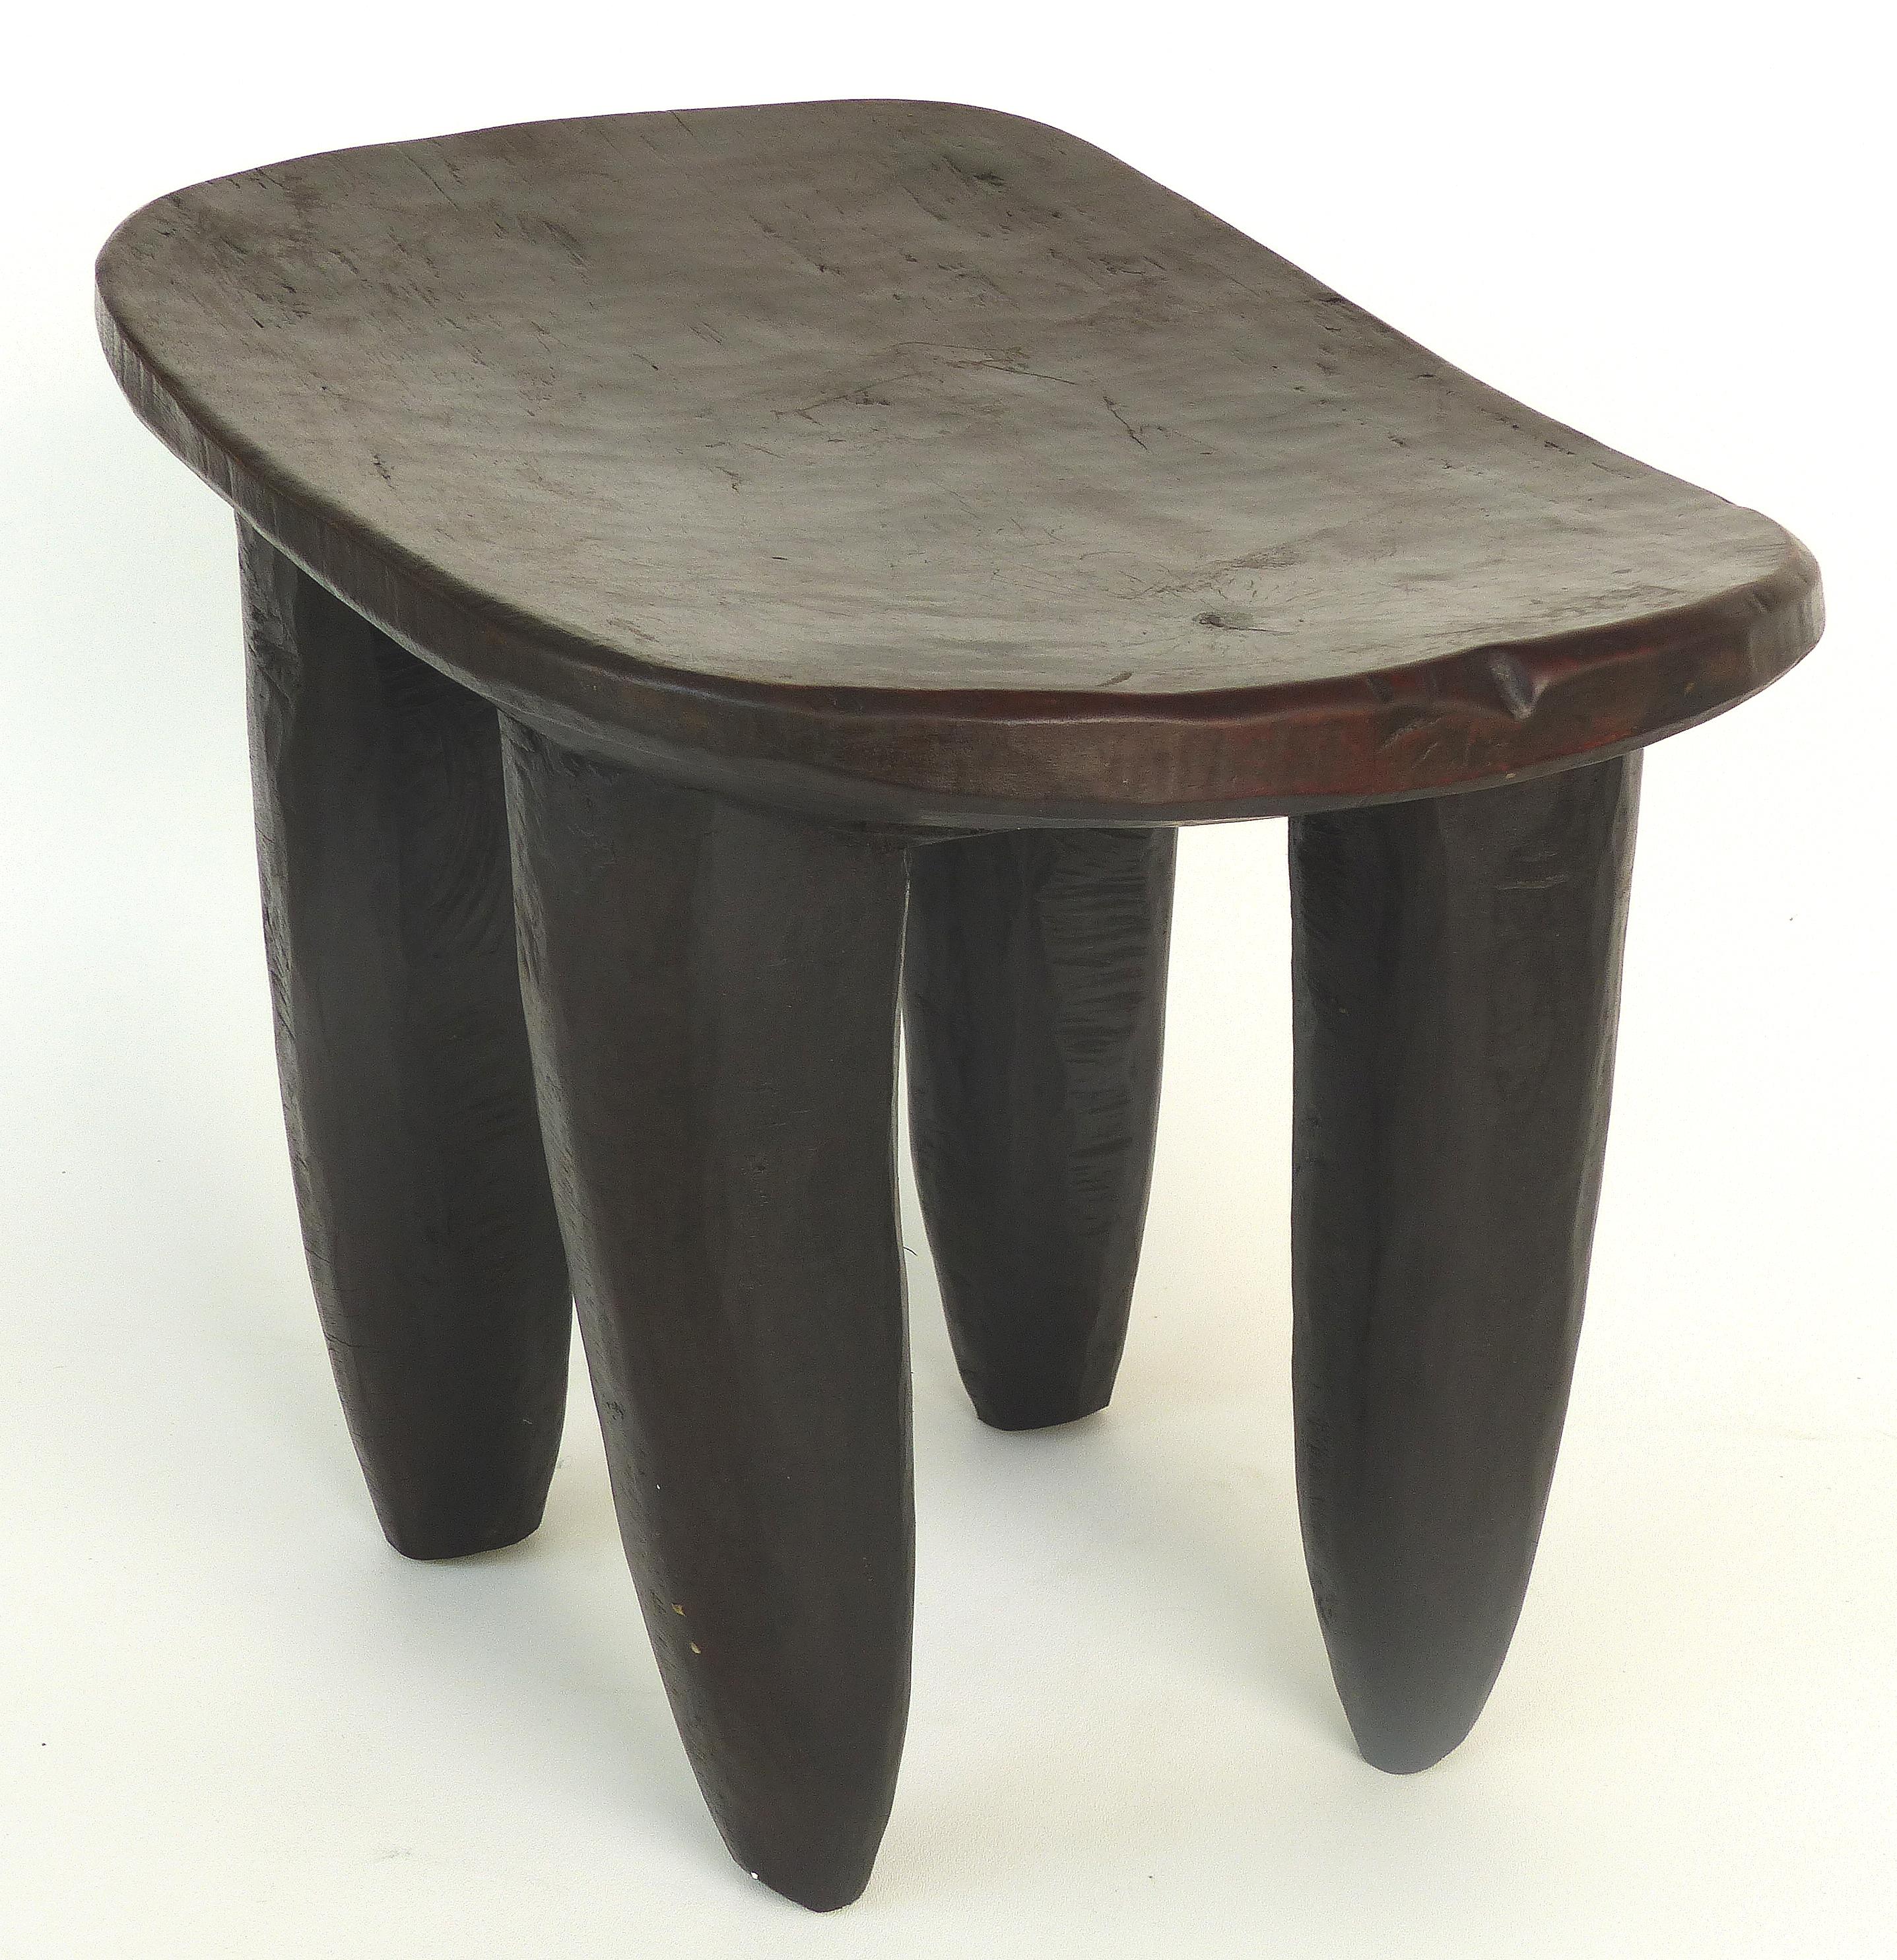 Offered for sale is an early 20th century hand-carved Senufo stool from Cote d'Ivoire. The chair is very stable and quite sensual. The wood shows lovely rustic textures of the hand carving. This stool can also be used as a side table.
Height